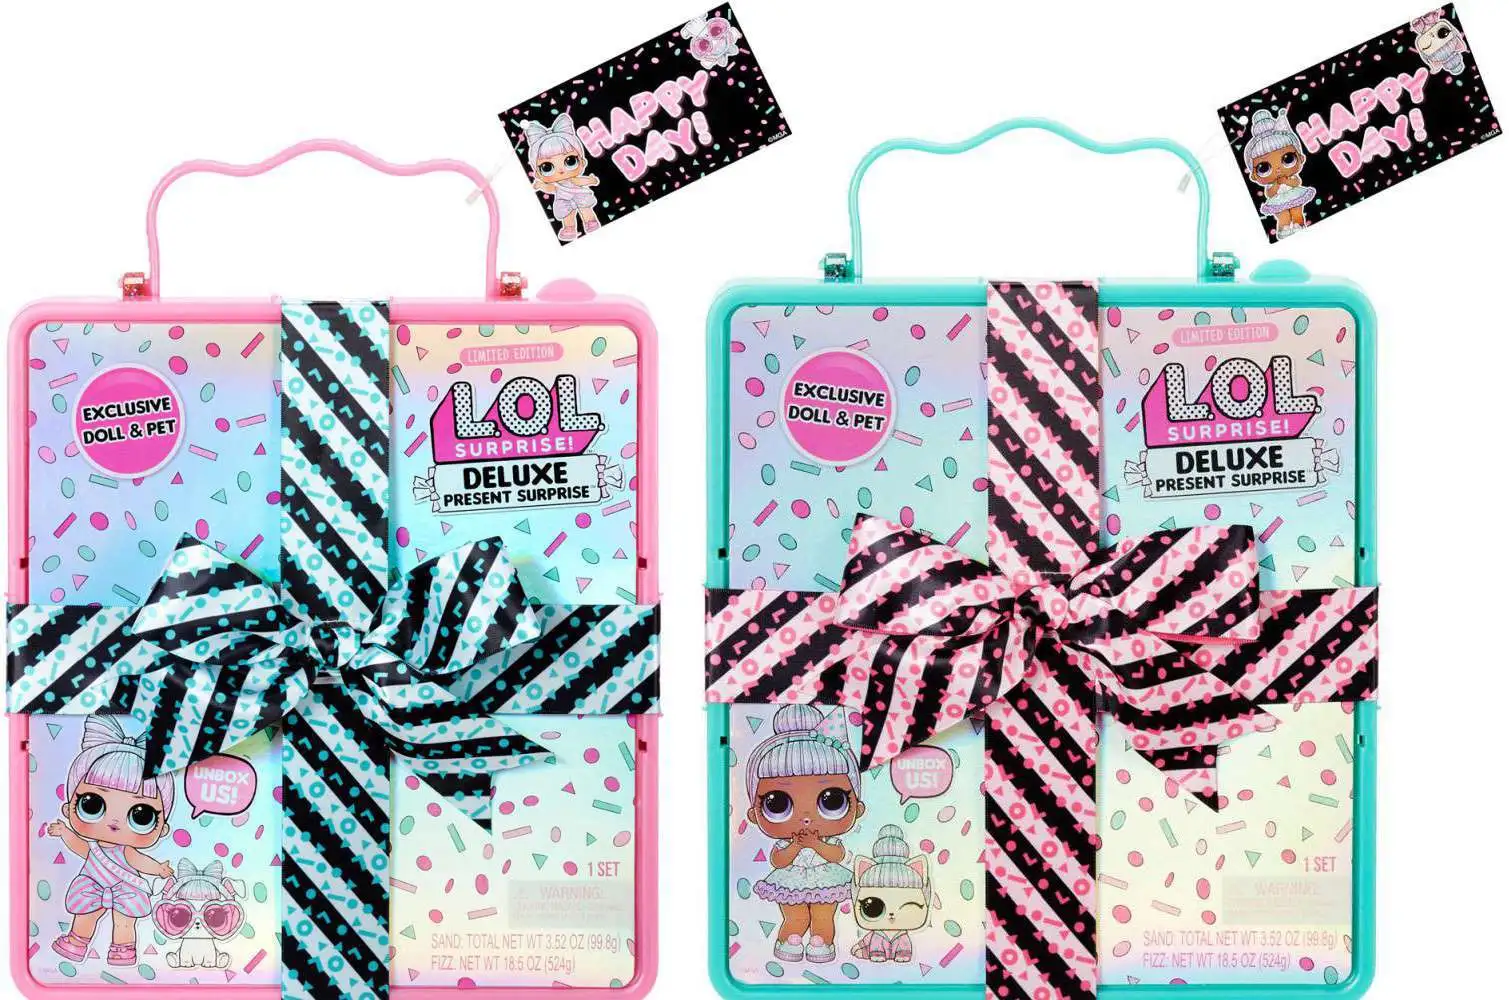 L.O.L Surprise Deluxe Present Surprise Limited Edition Sprinkles Doll and Pet 